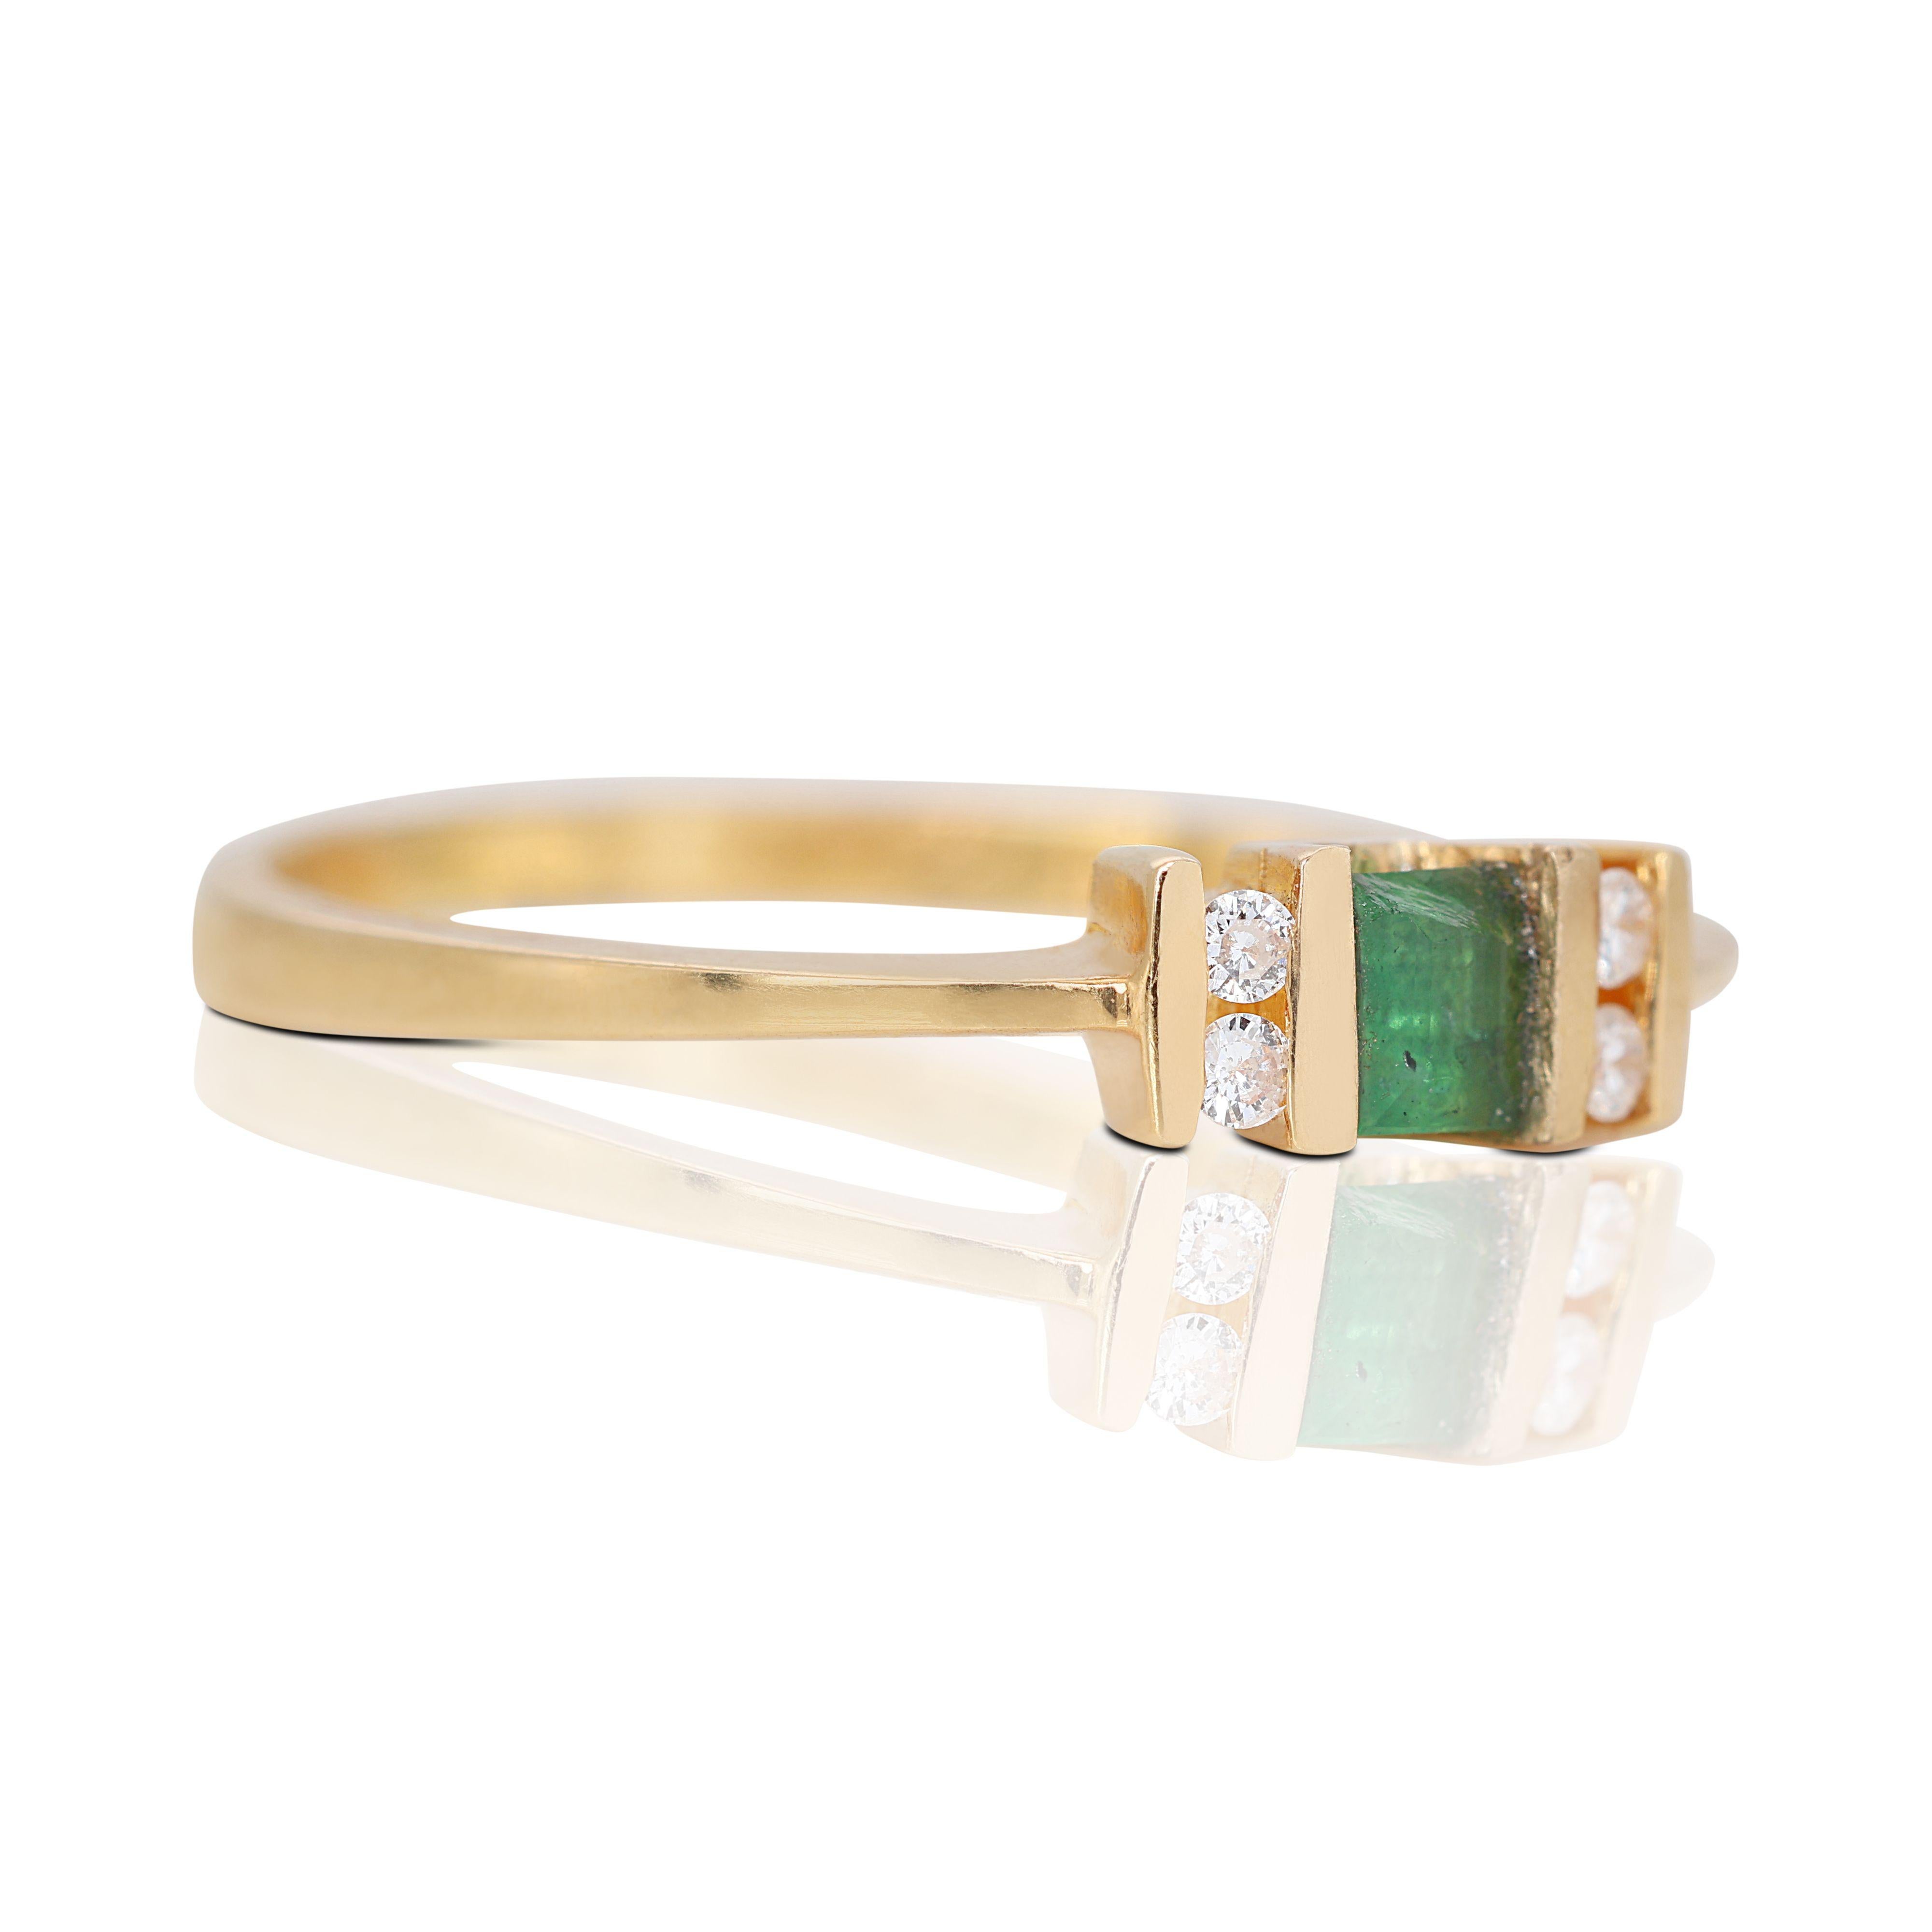 Exquisite 3-stone Emerald Diamond Ring in 18K Yellow Gold In Excellent Condition For Sale In רמת גן, IL